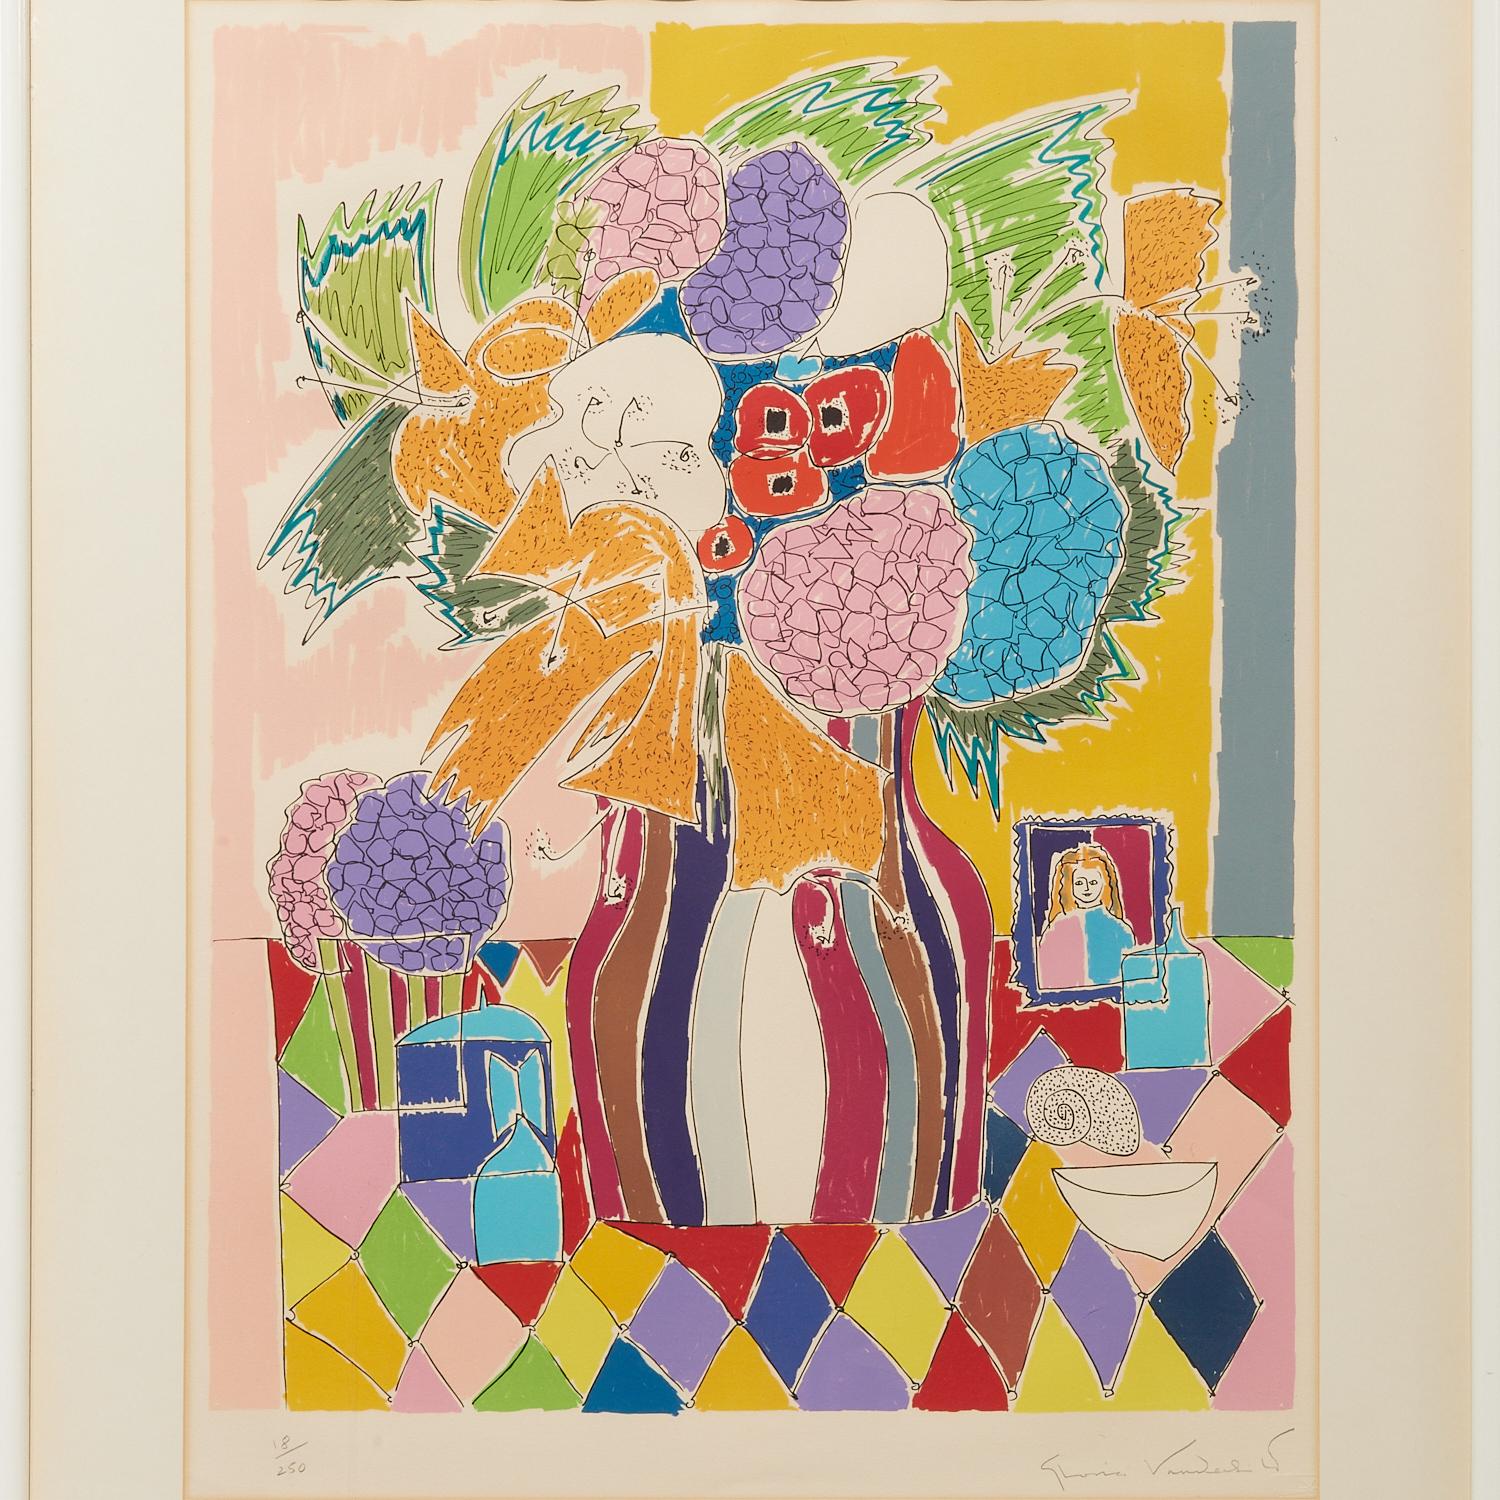 Circa 1971, Springtime Flowers, a lithograph by Gloria Vanderbilt (1924-2019) pencil signed and numbered #18/250, She herself said “Color is my strongest passion, I can get absolutely intoxicated with colors and combining different colors.